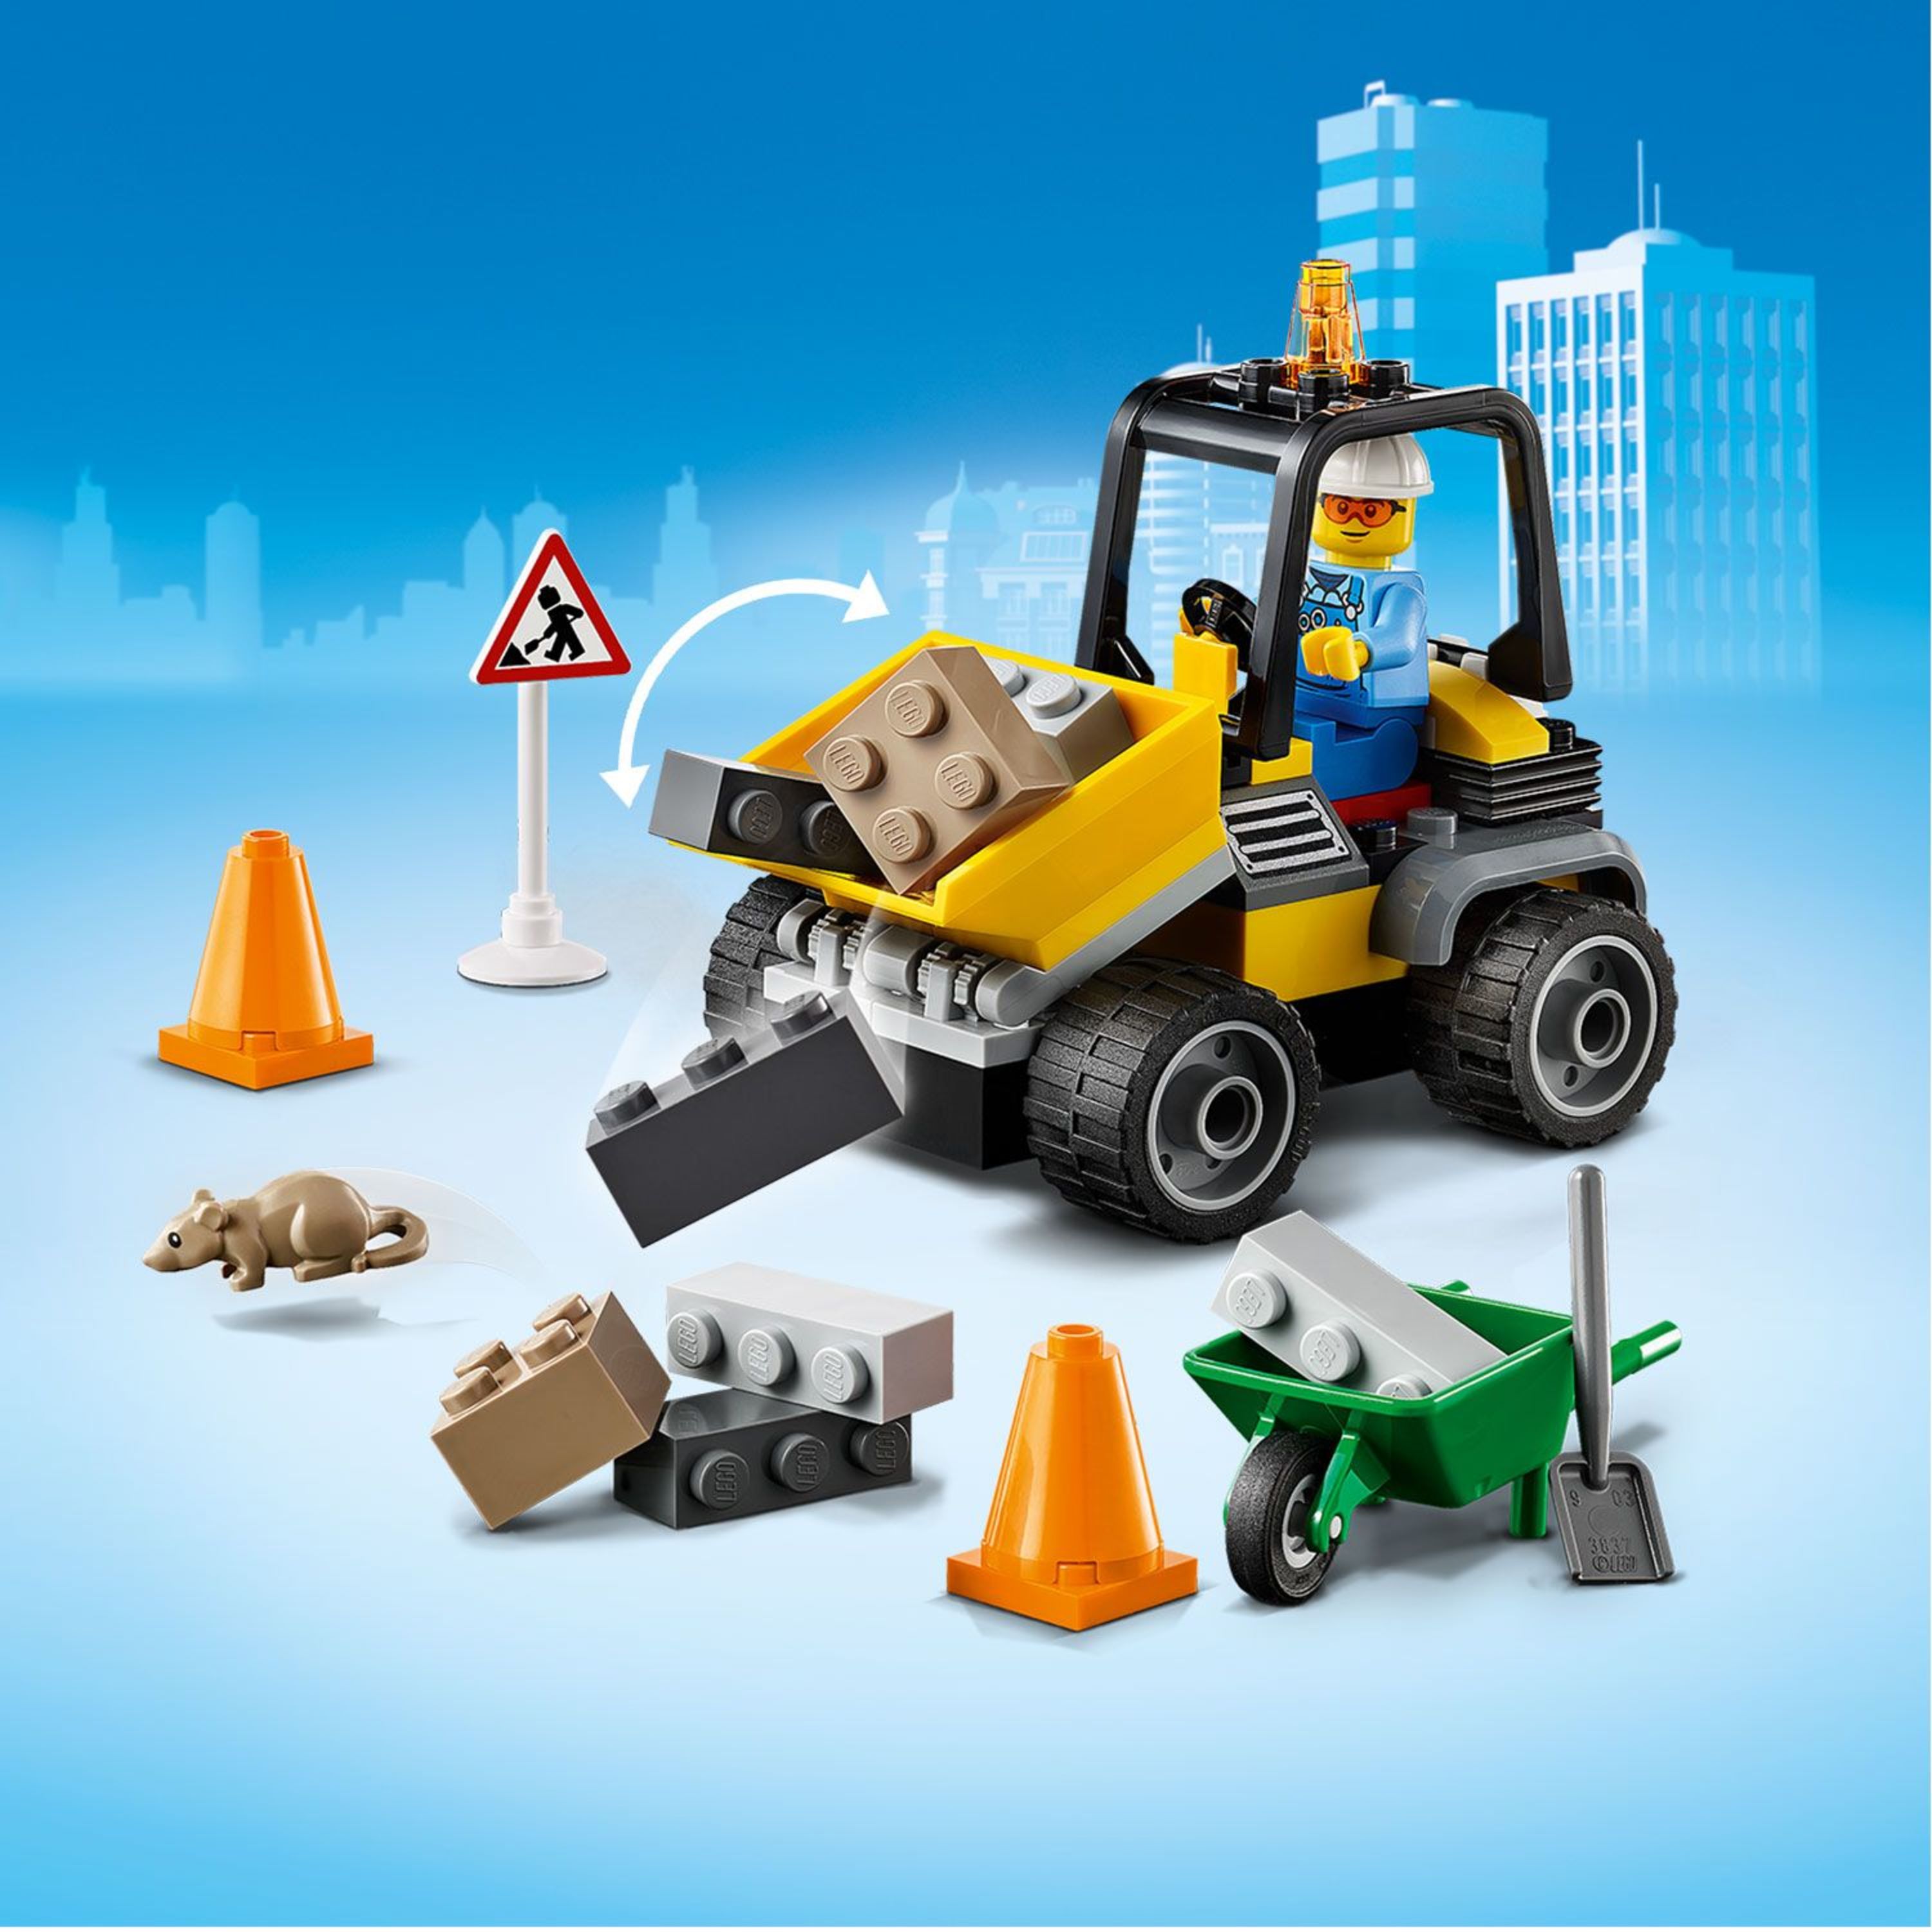 LEGO City Roadwork Truck 60284 Building Toy; Cool Roadworks Construction Set for Kids (58 Pieces) - image 5 of 7